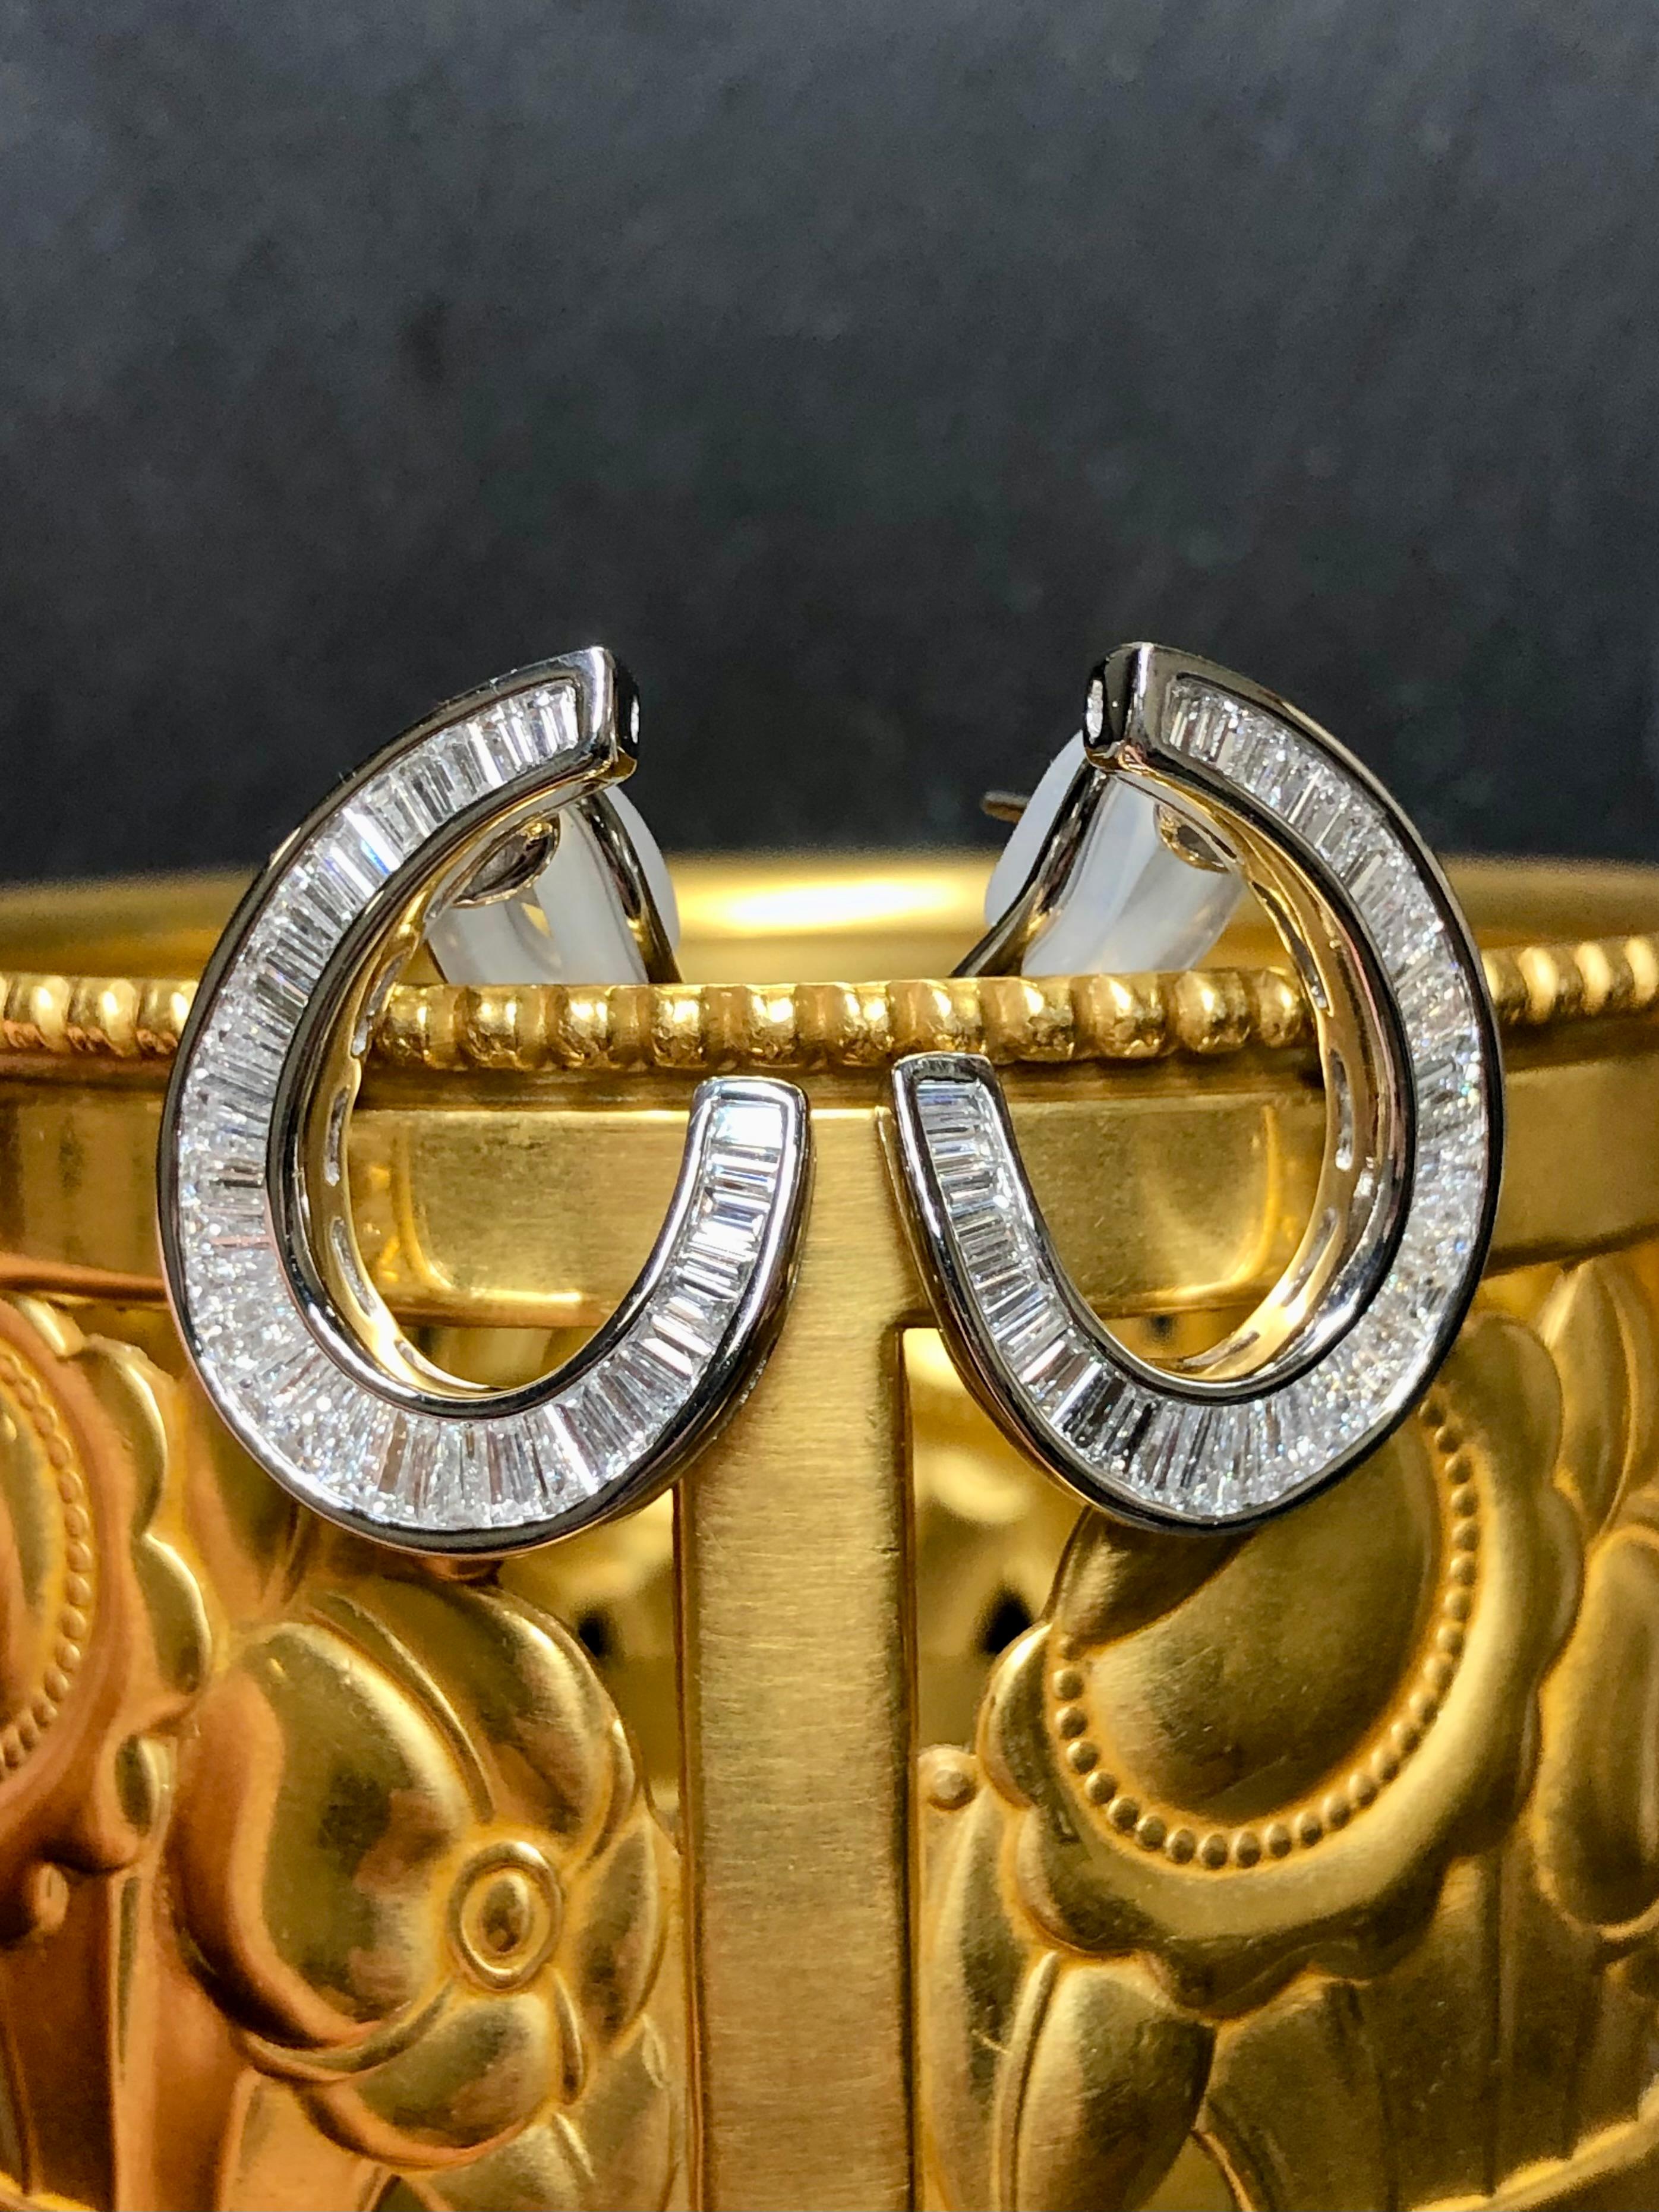 A classic pair of finely made earrings done in platinum and channel set with 66 straight and tapered baguette diamonds. All stones are G-H color and Vs1 clarity with a total approximate weight of 3.90cttw. Earrings has posts with omega